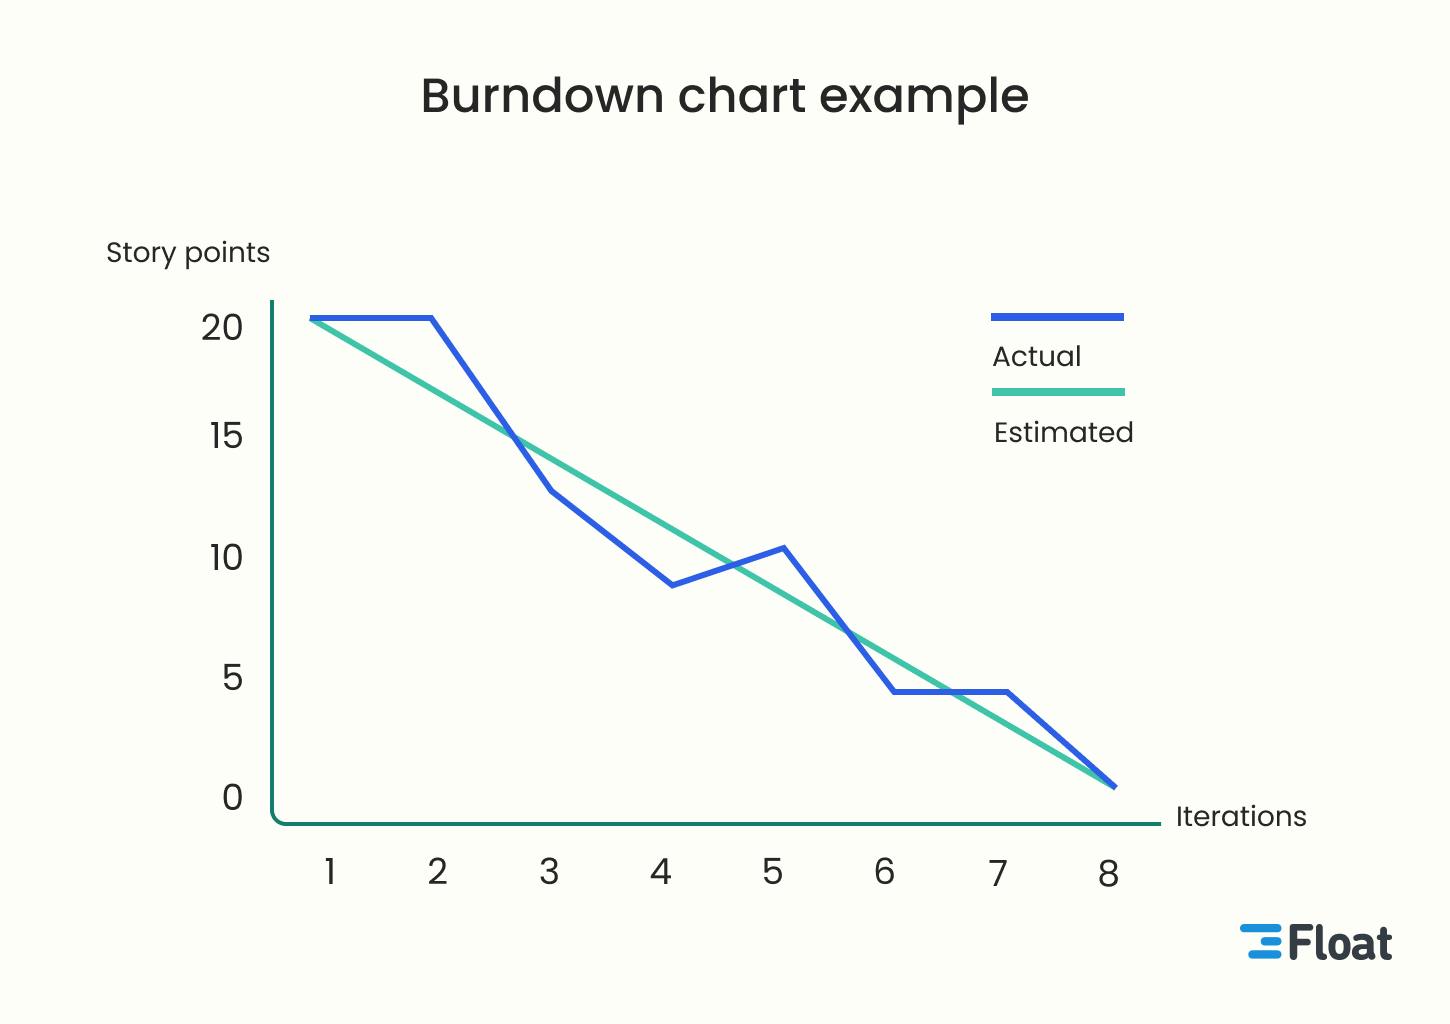 an example of a burndown chart showing the actual and estimated work measured in story points per iteration